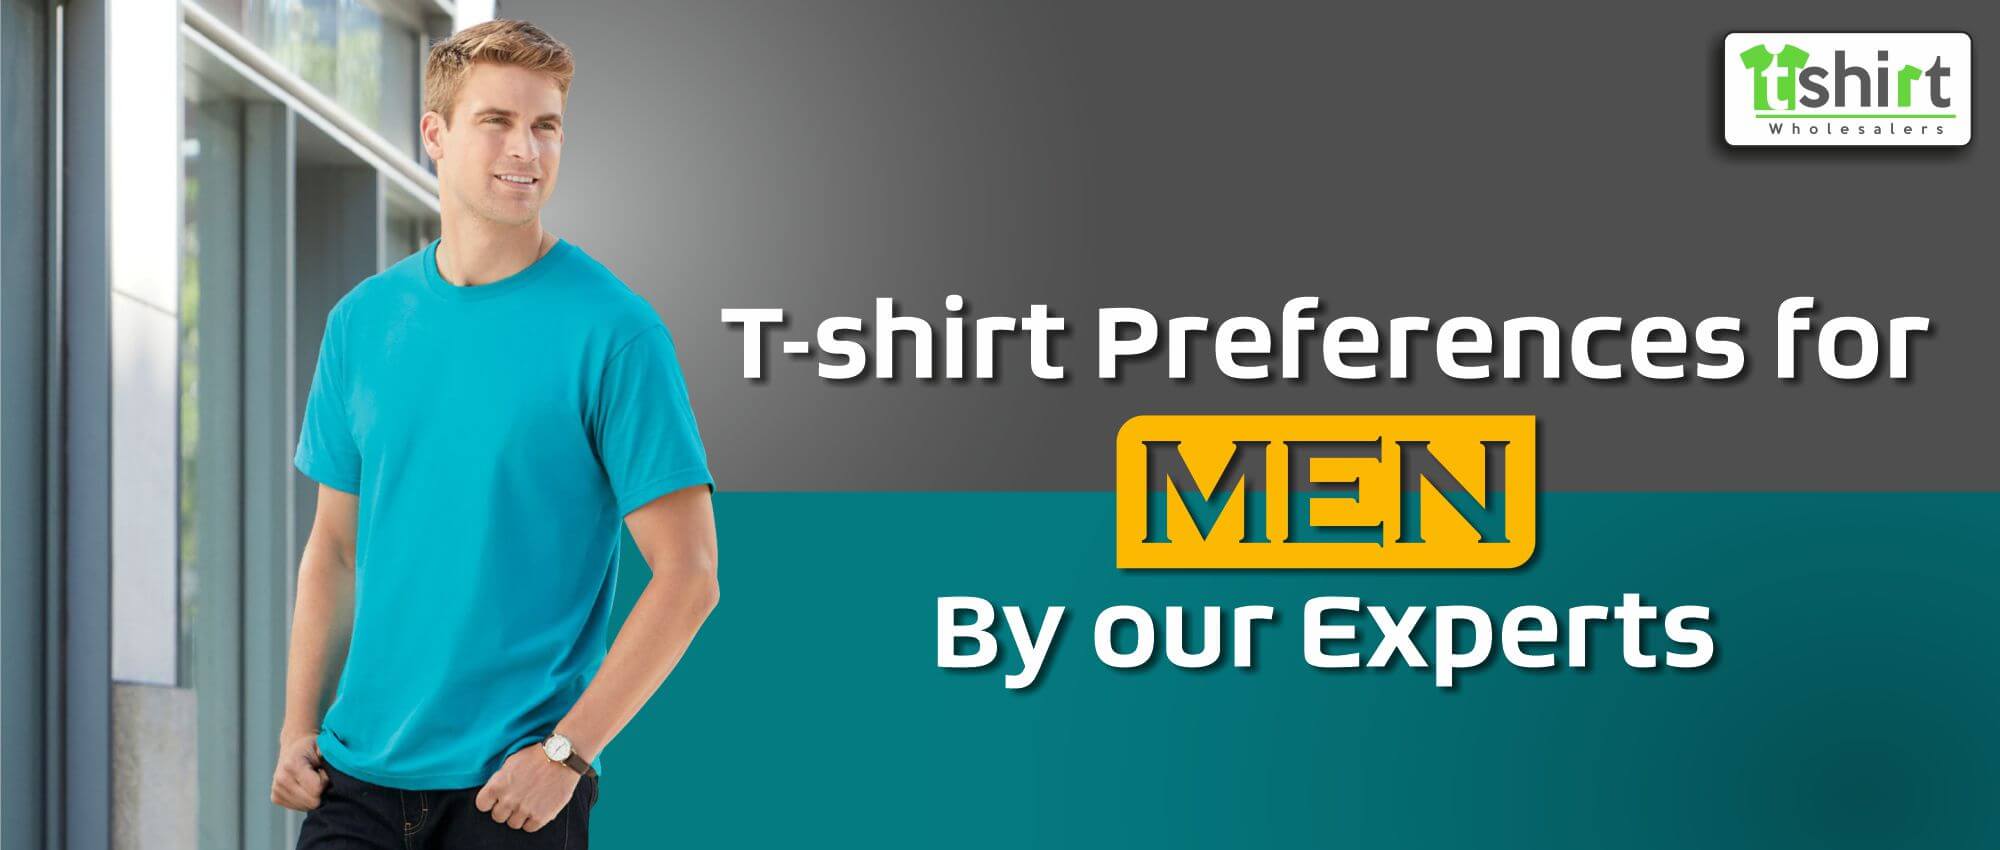 T-SHIRT PREFERENCES FOR MEN BY OUR EXPERTS